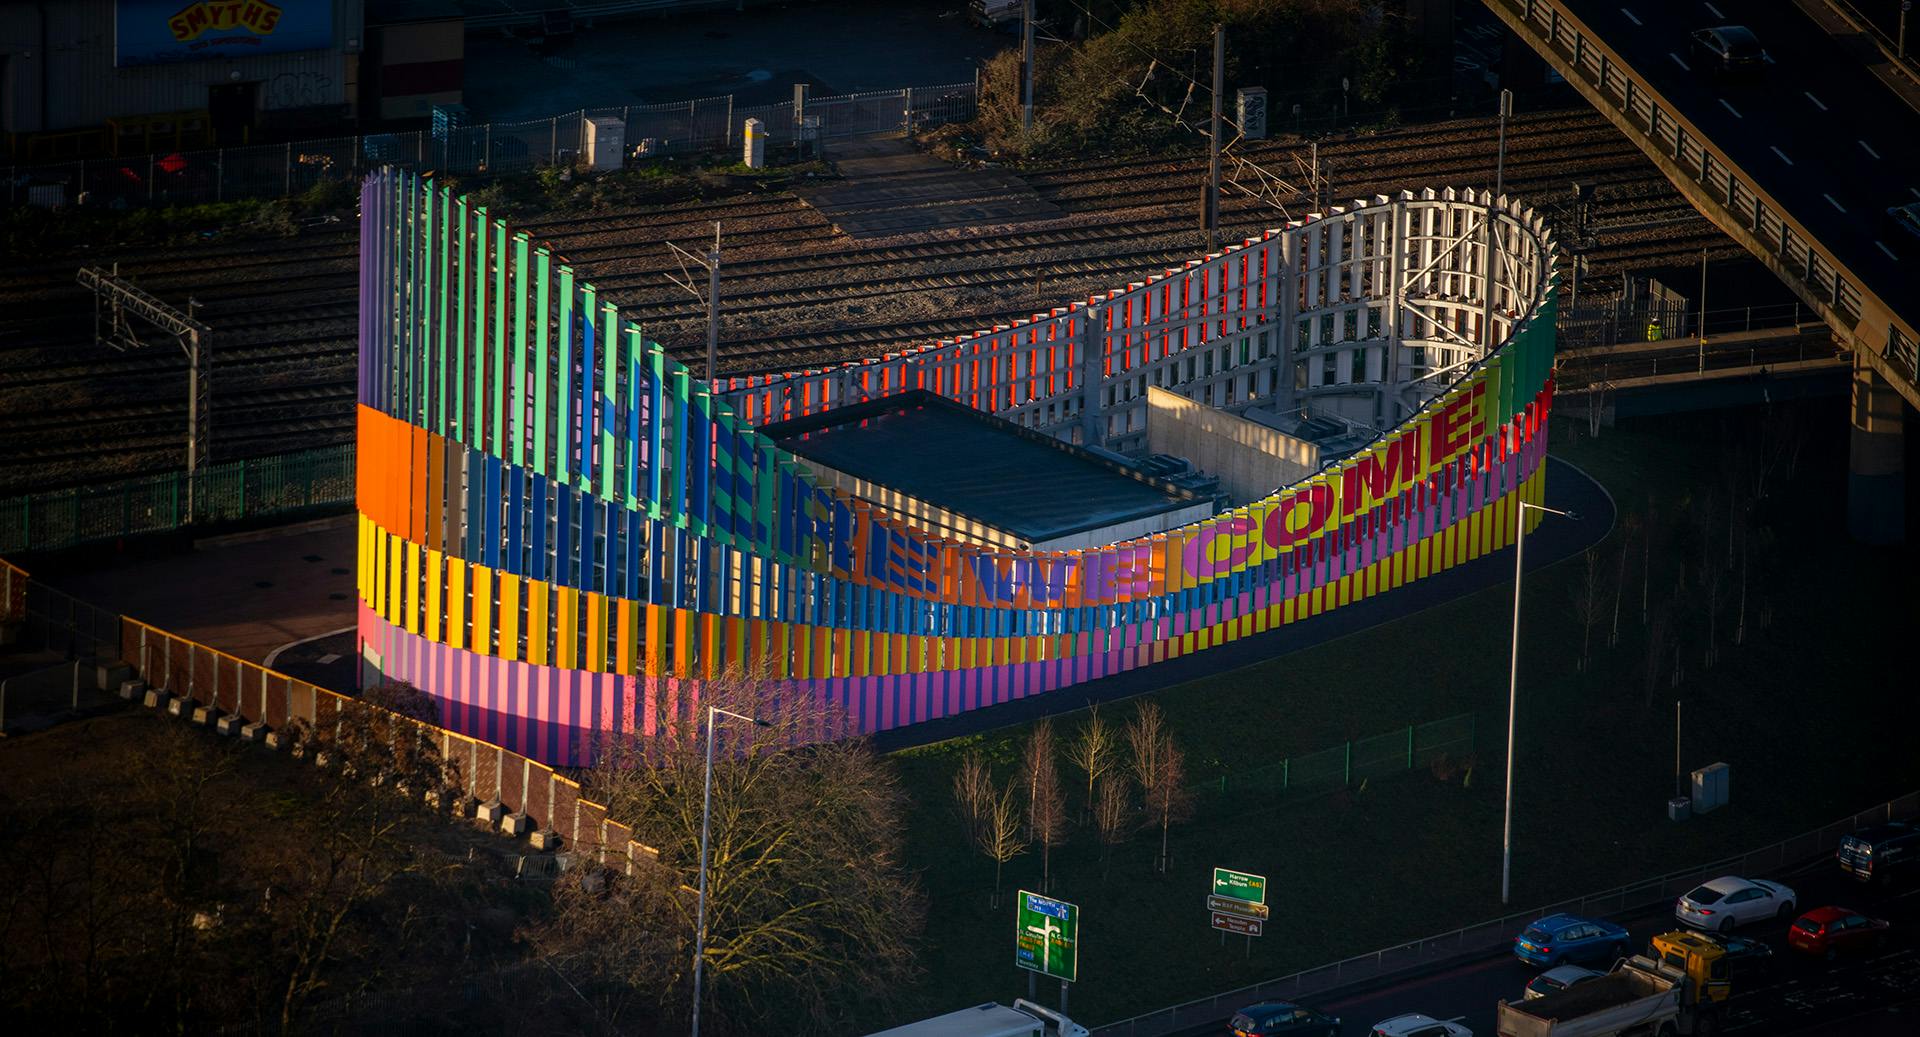 Image shows the colourful exterior of the Brent Cross Town electrical substation next to a busy road, designed by artist Lakwena